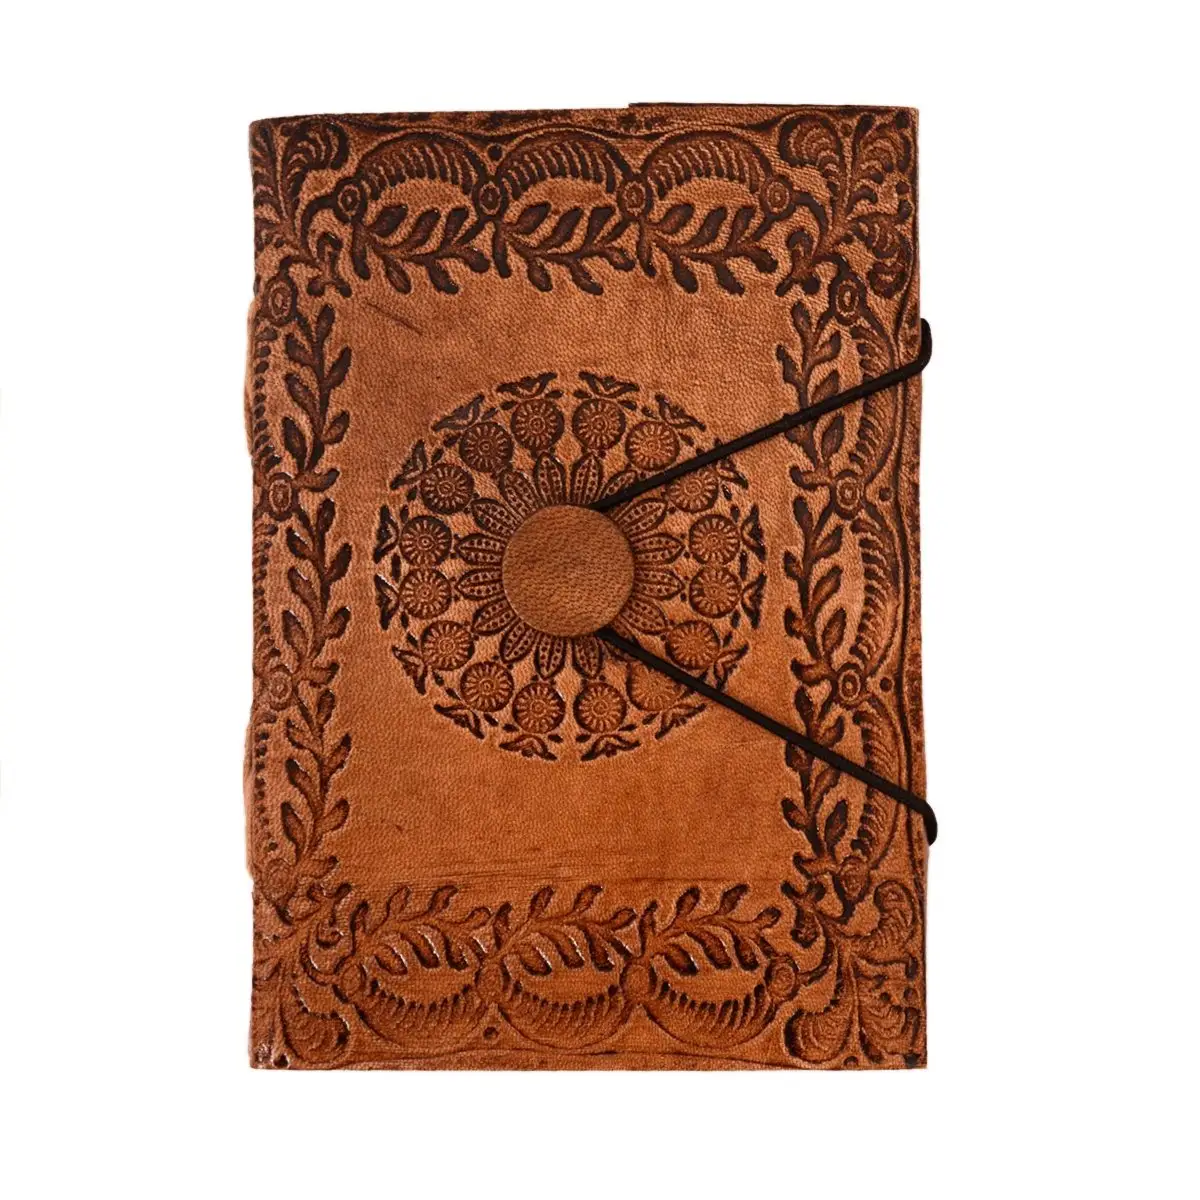 Buy Wholesale Genuine Leather Journal with Handmade Cotton Paper and Unique Strap Lock Size-A4 A5 Best for Sketching